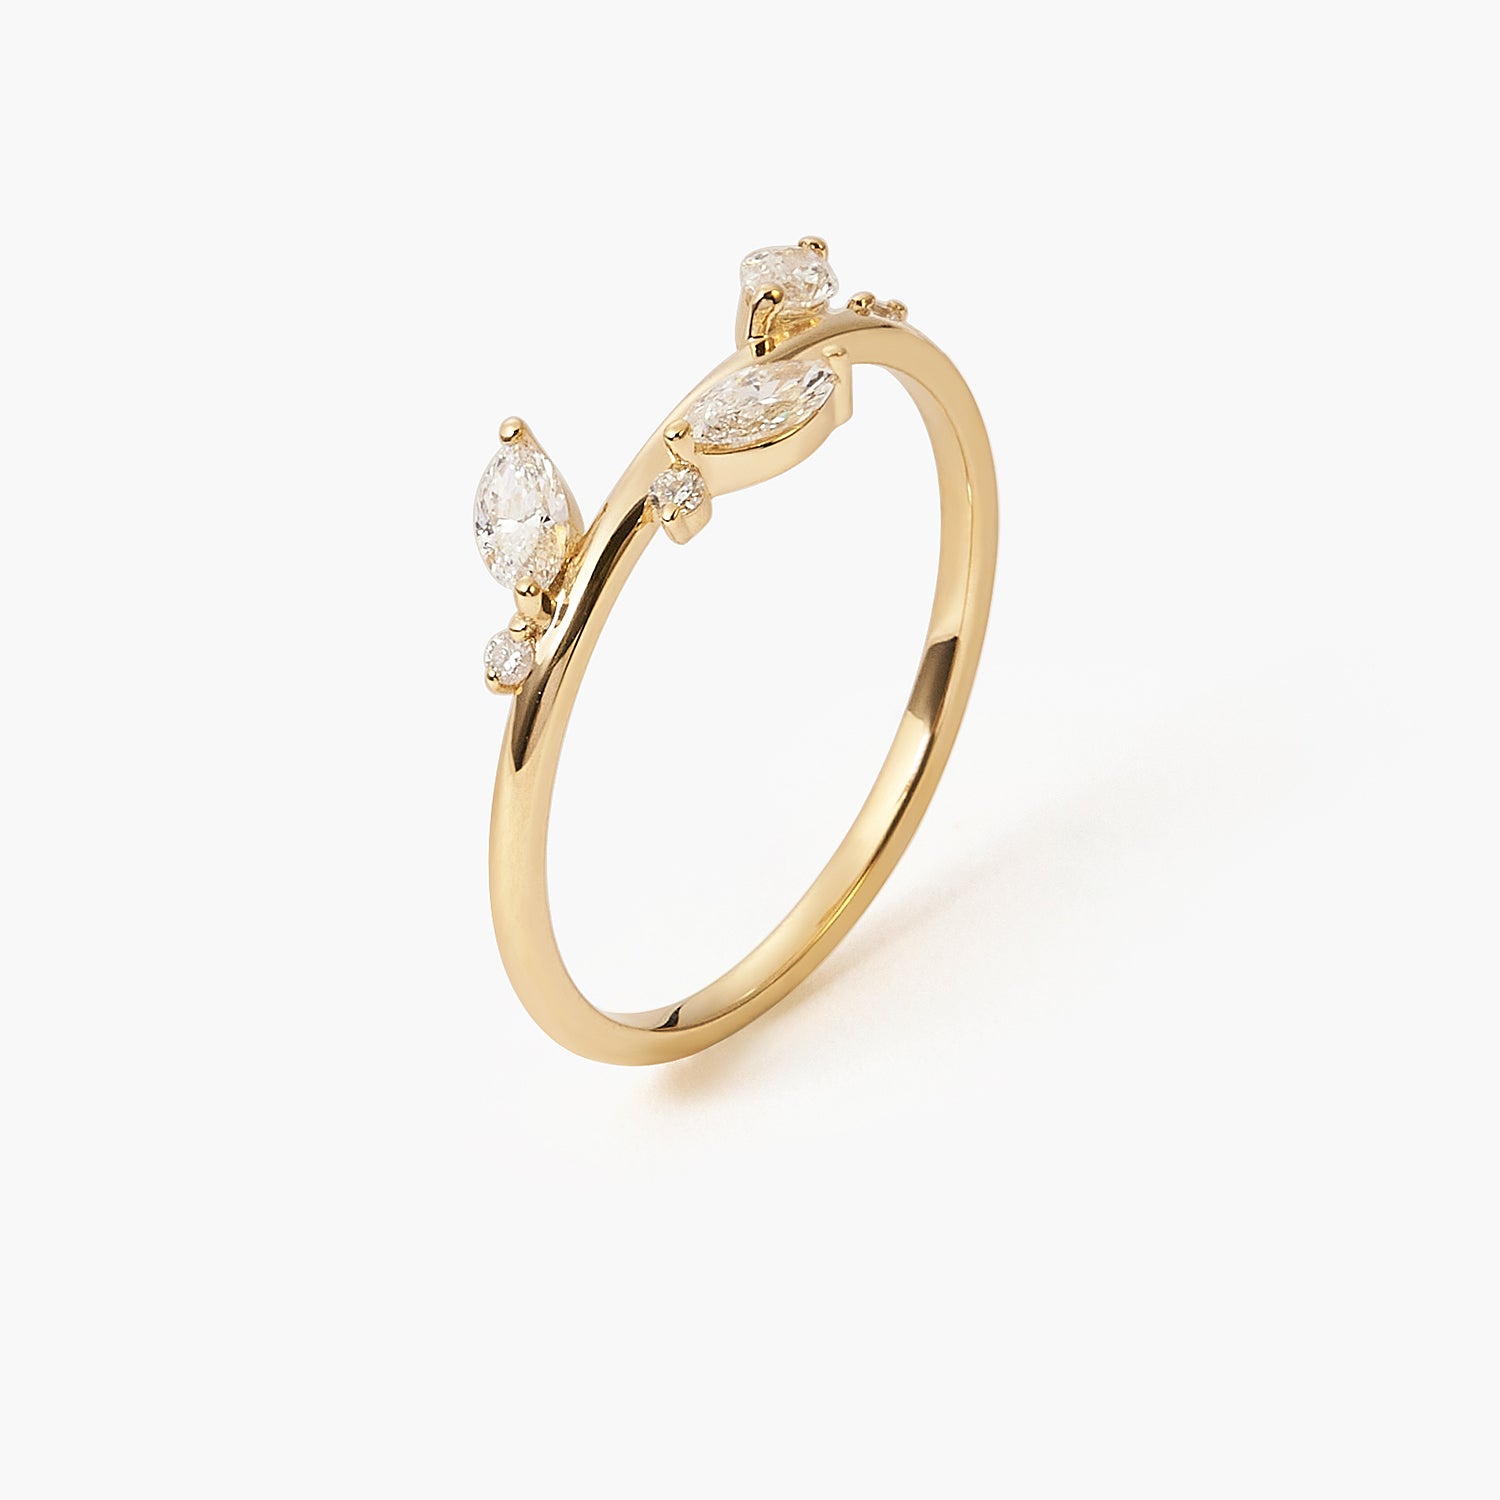 Simplicity By The Bushel Ring In Diamond